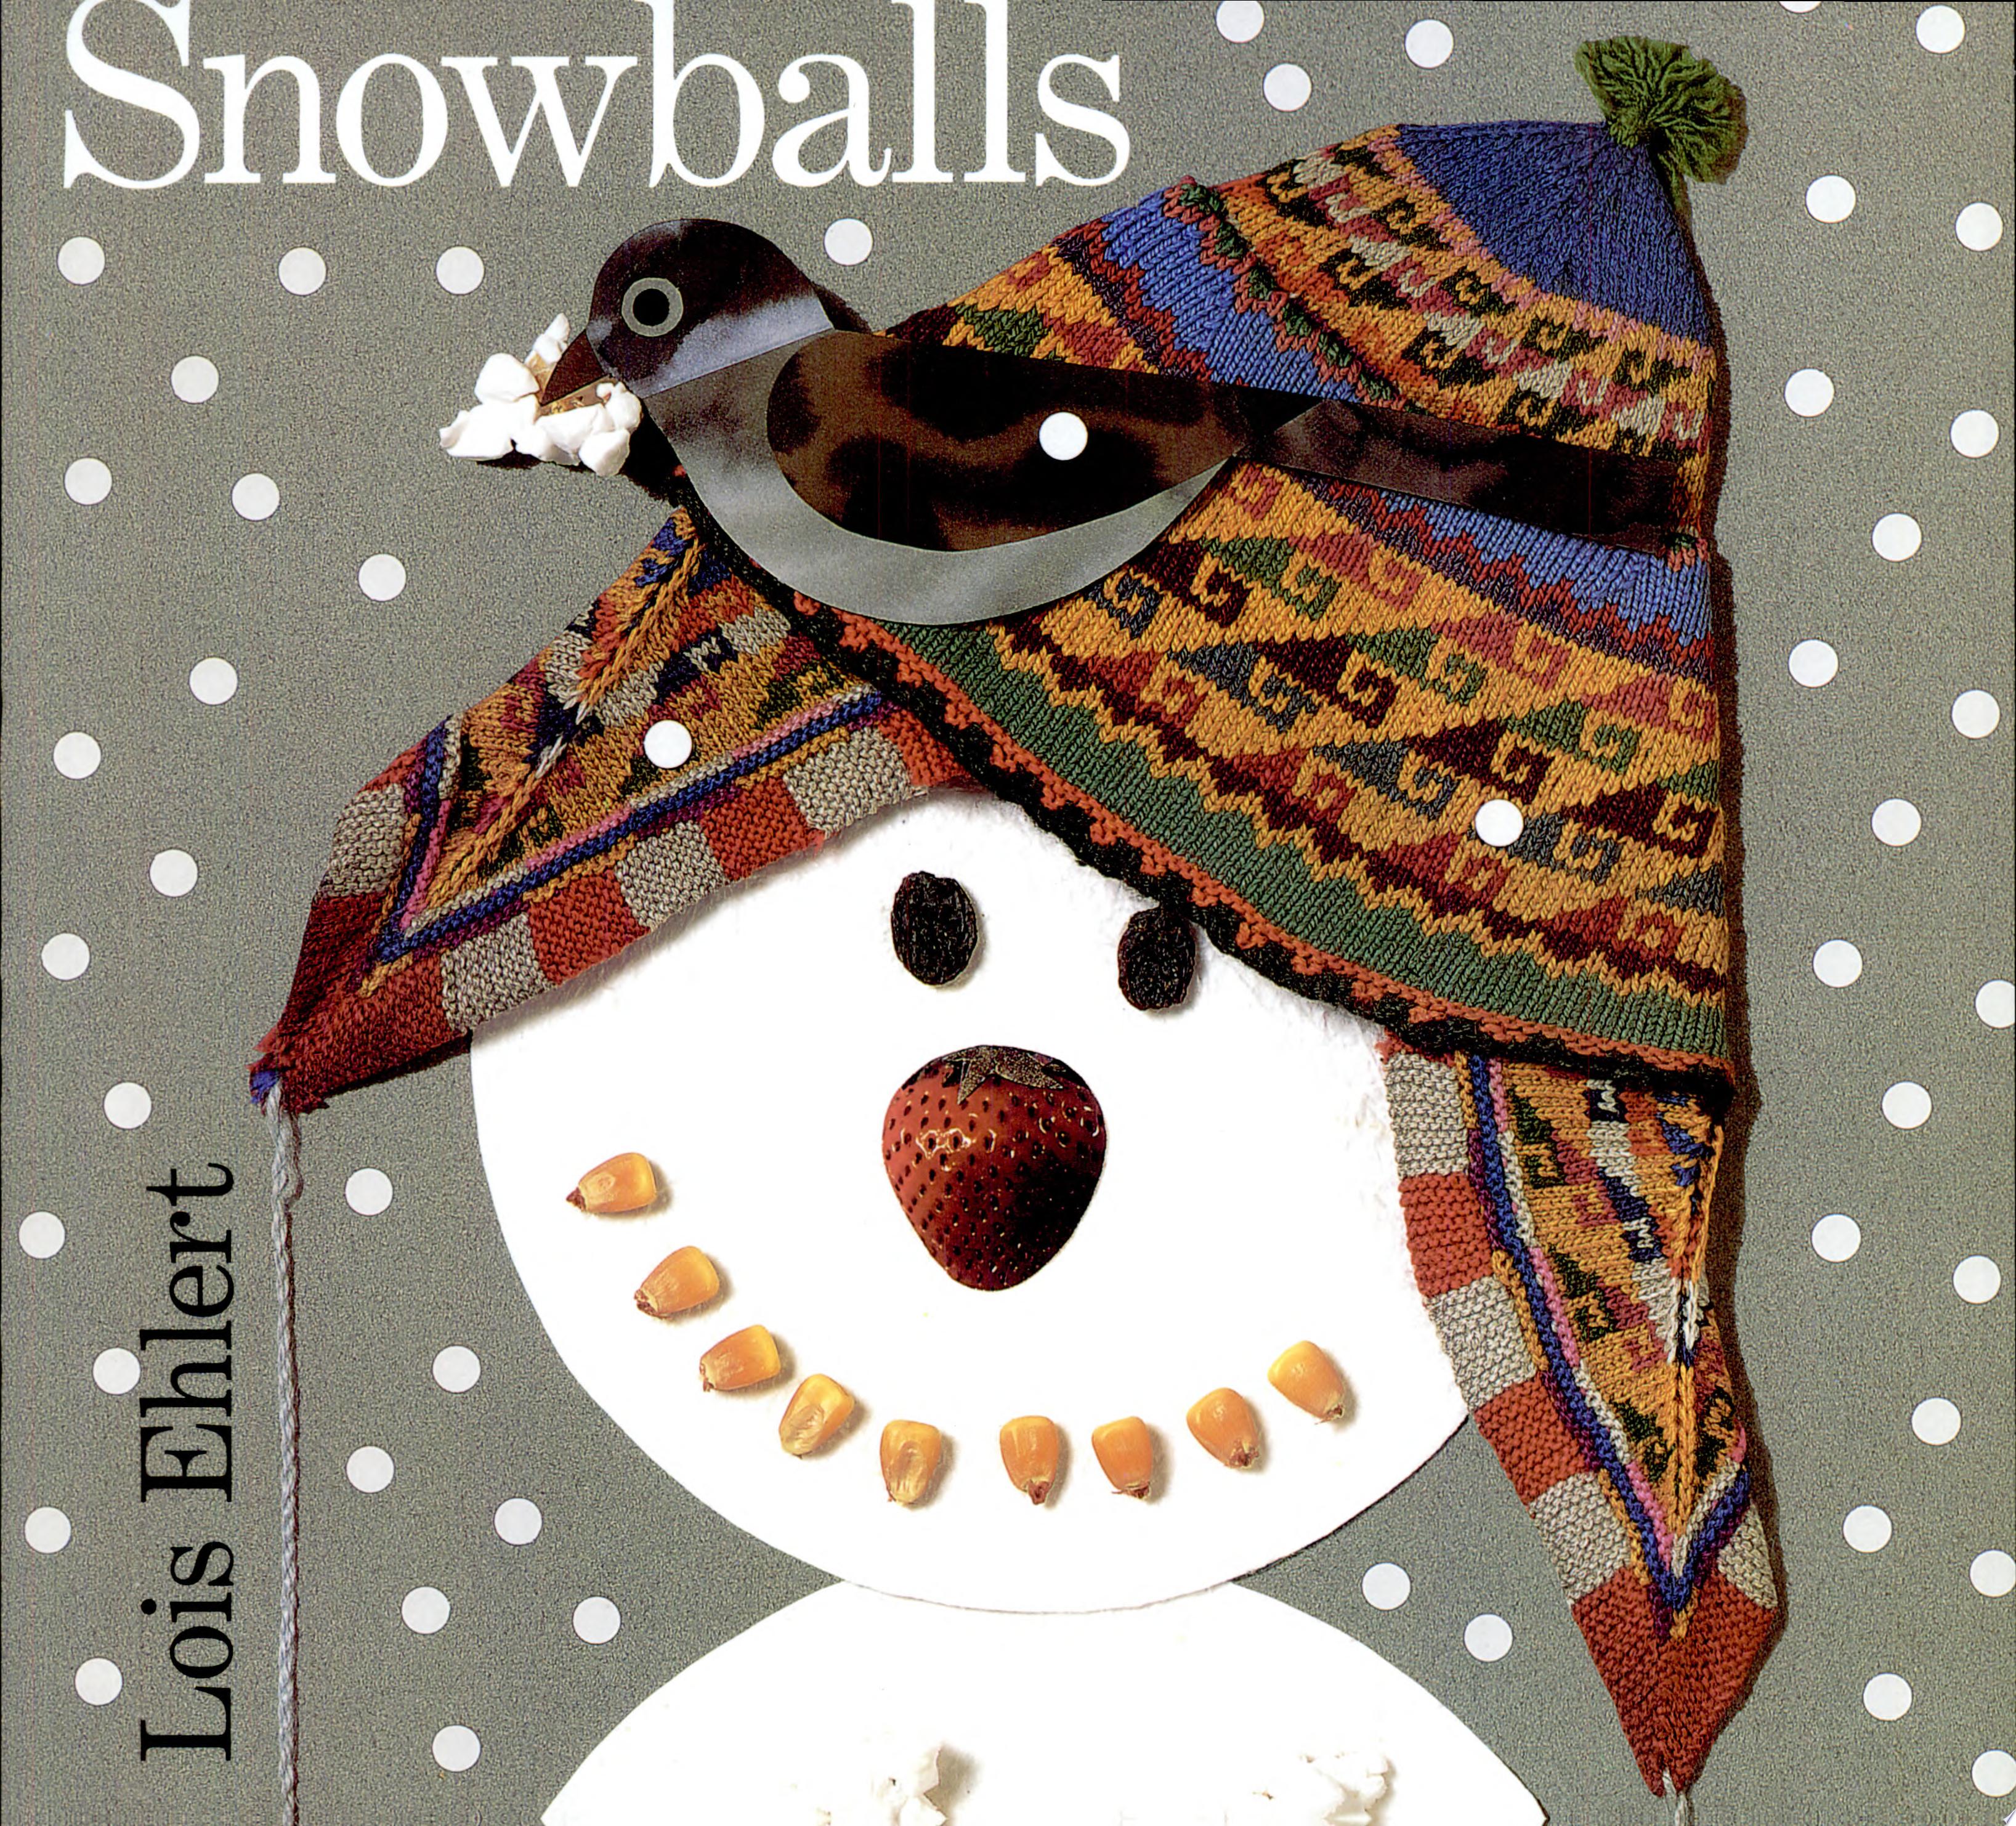 Image for "Snowballs"